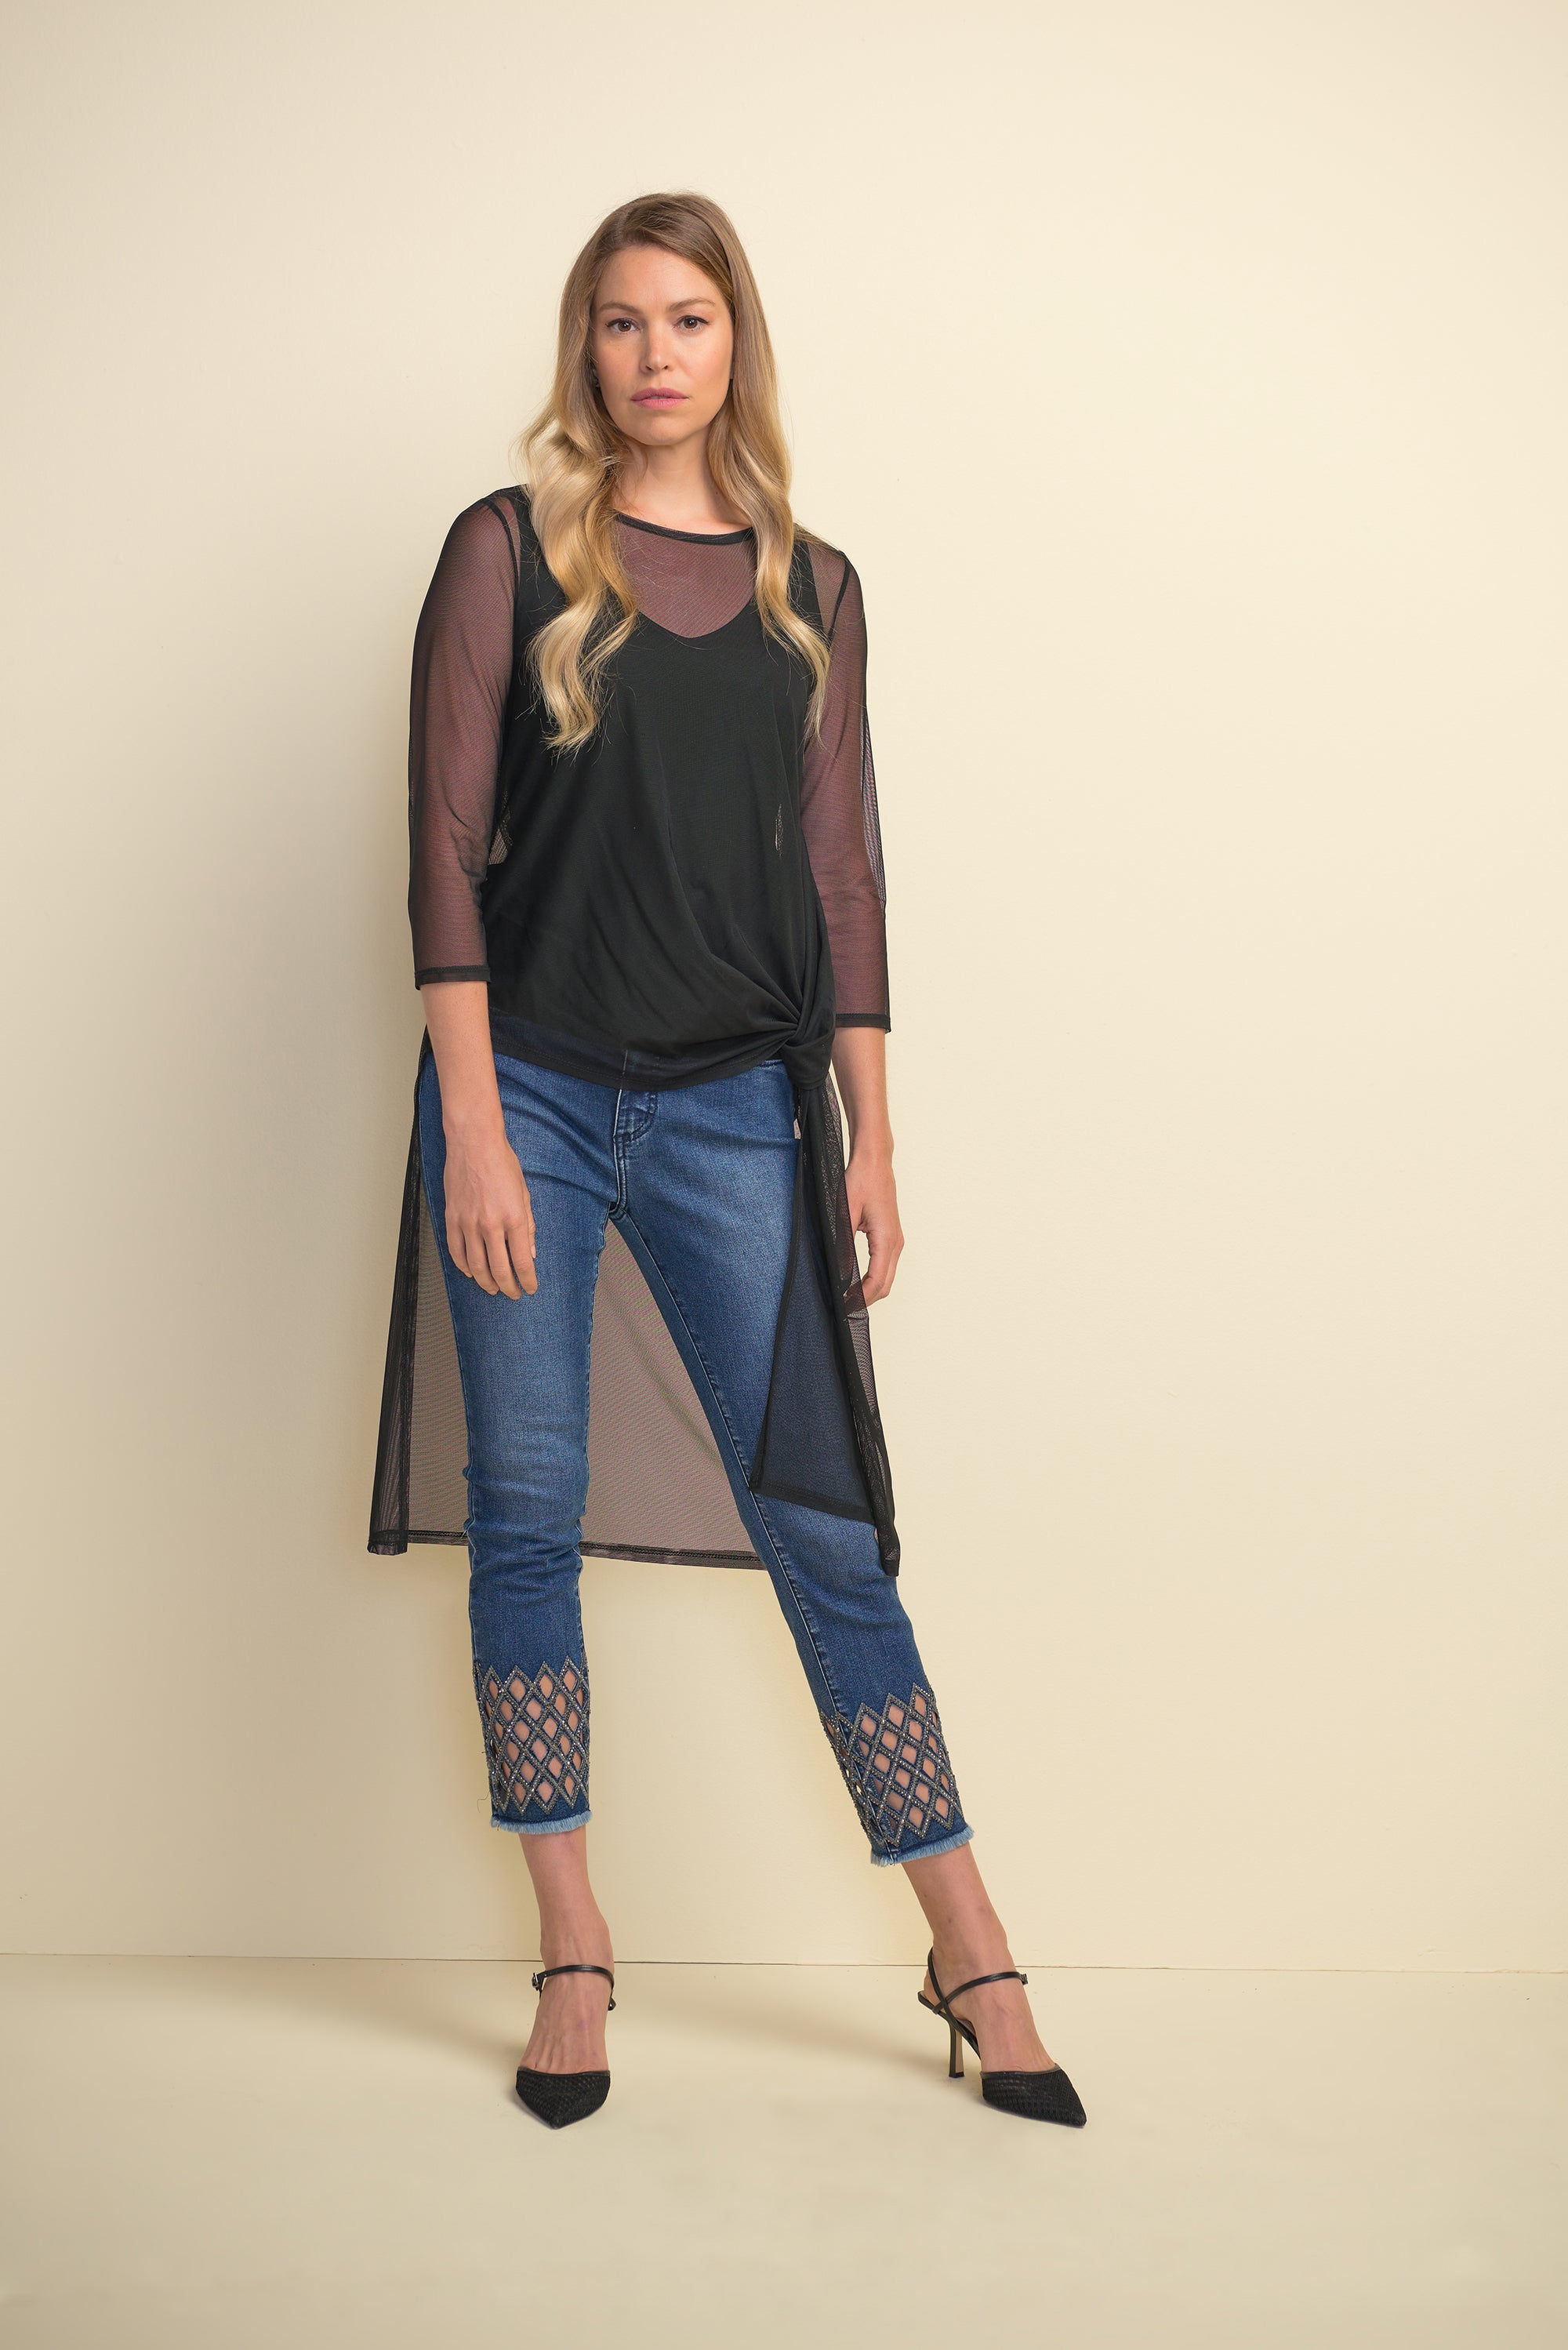 Mesh High-Low Tunic 211420 - After Hours Boutique